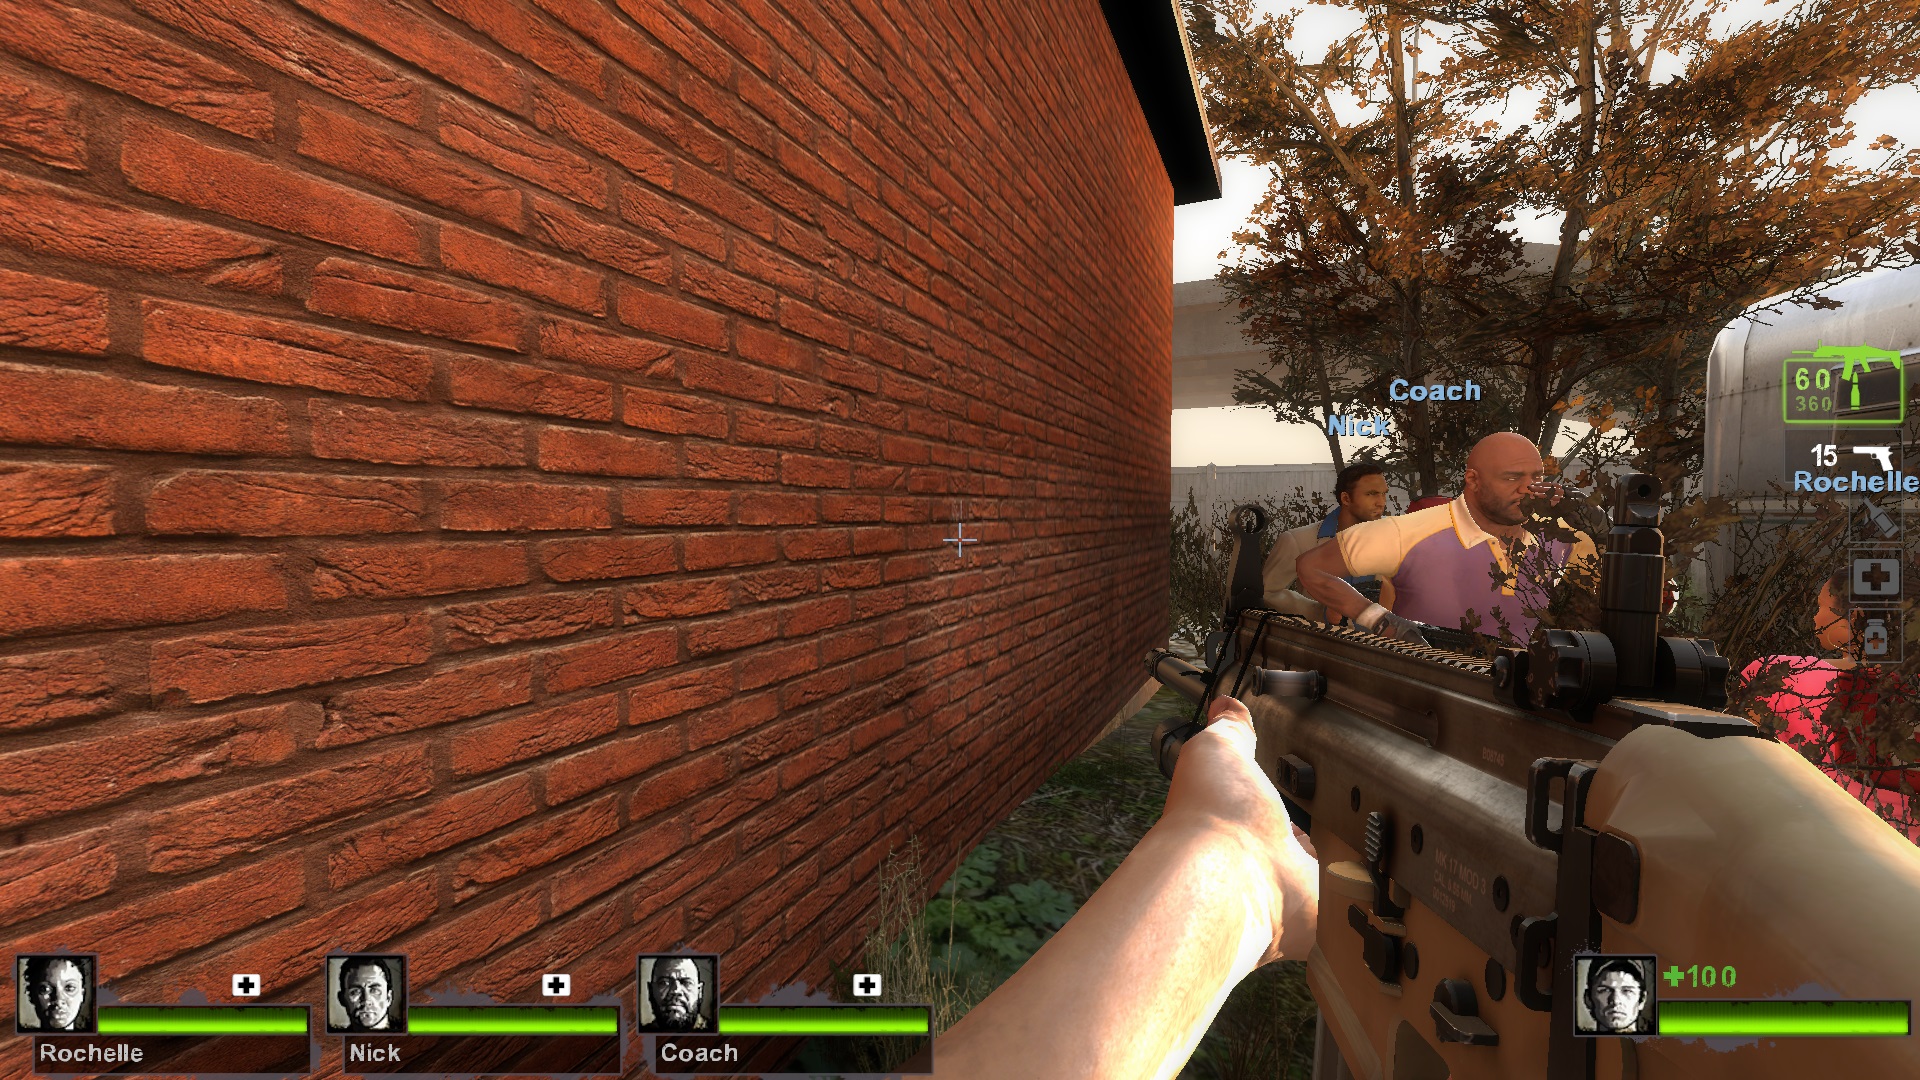 L4d2 Hd Textures Are Stretched Alliedmodders